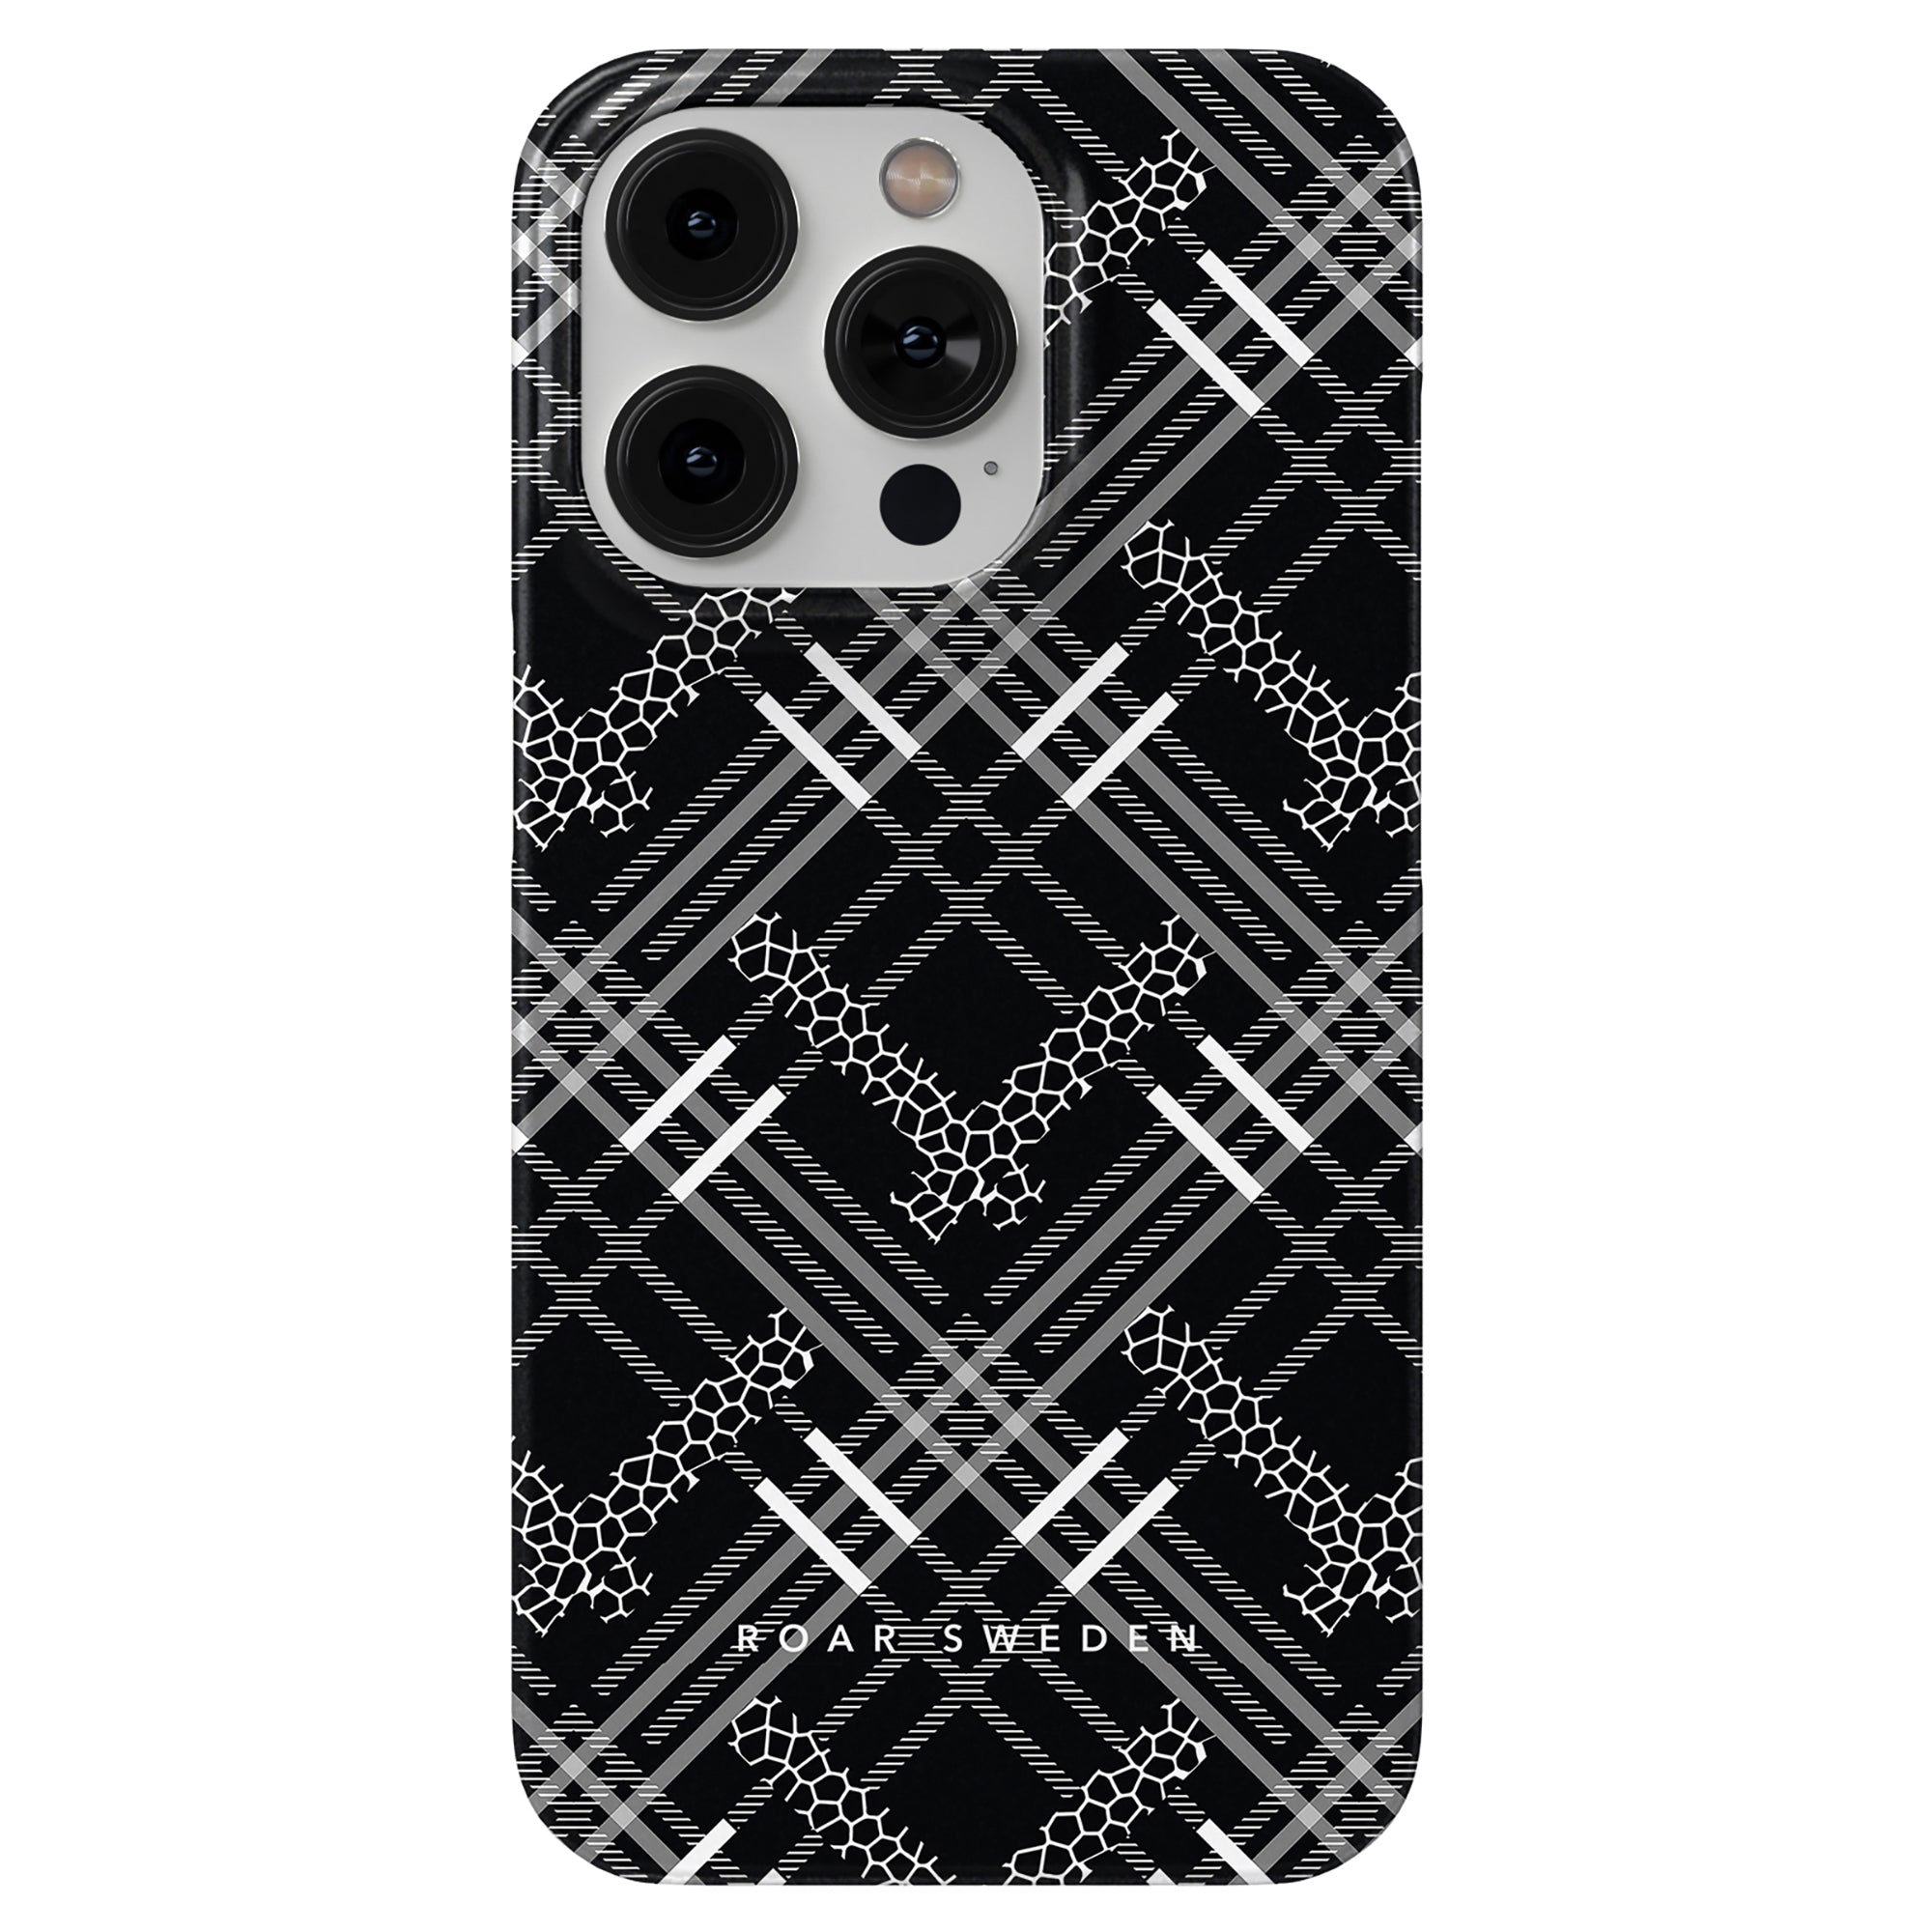 A Tartan Giraffe - Slim case for the iPhone 11 featuring a graphic pattern.